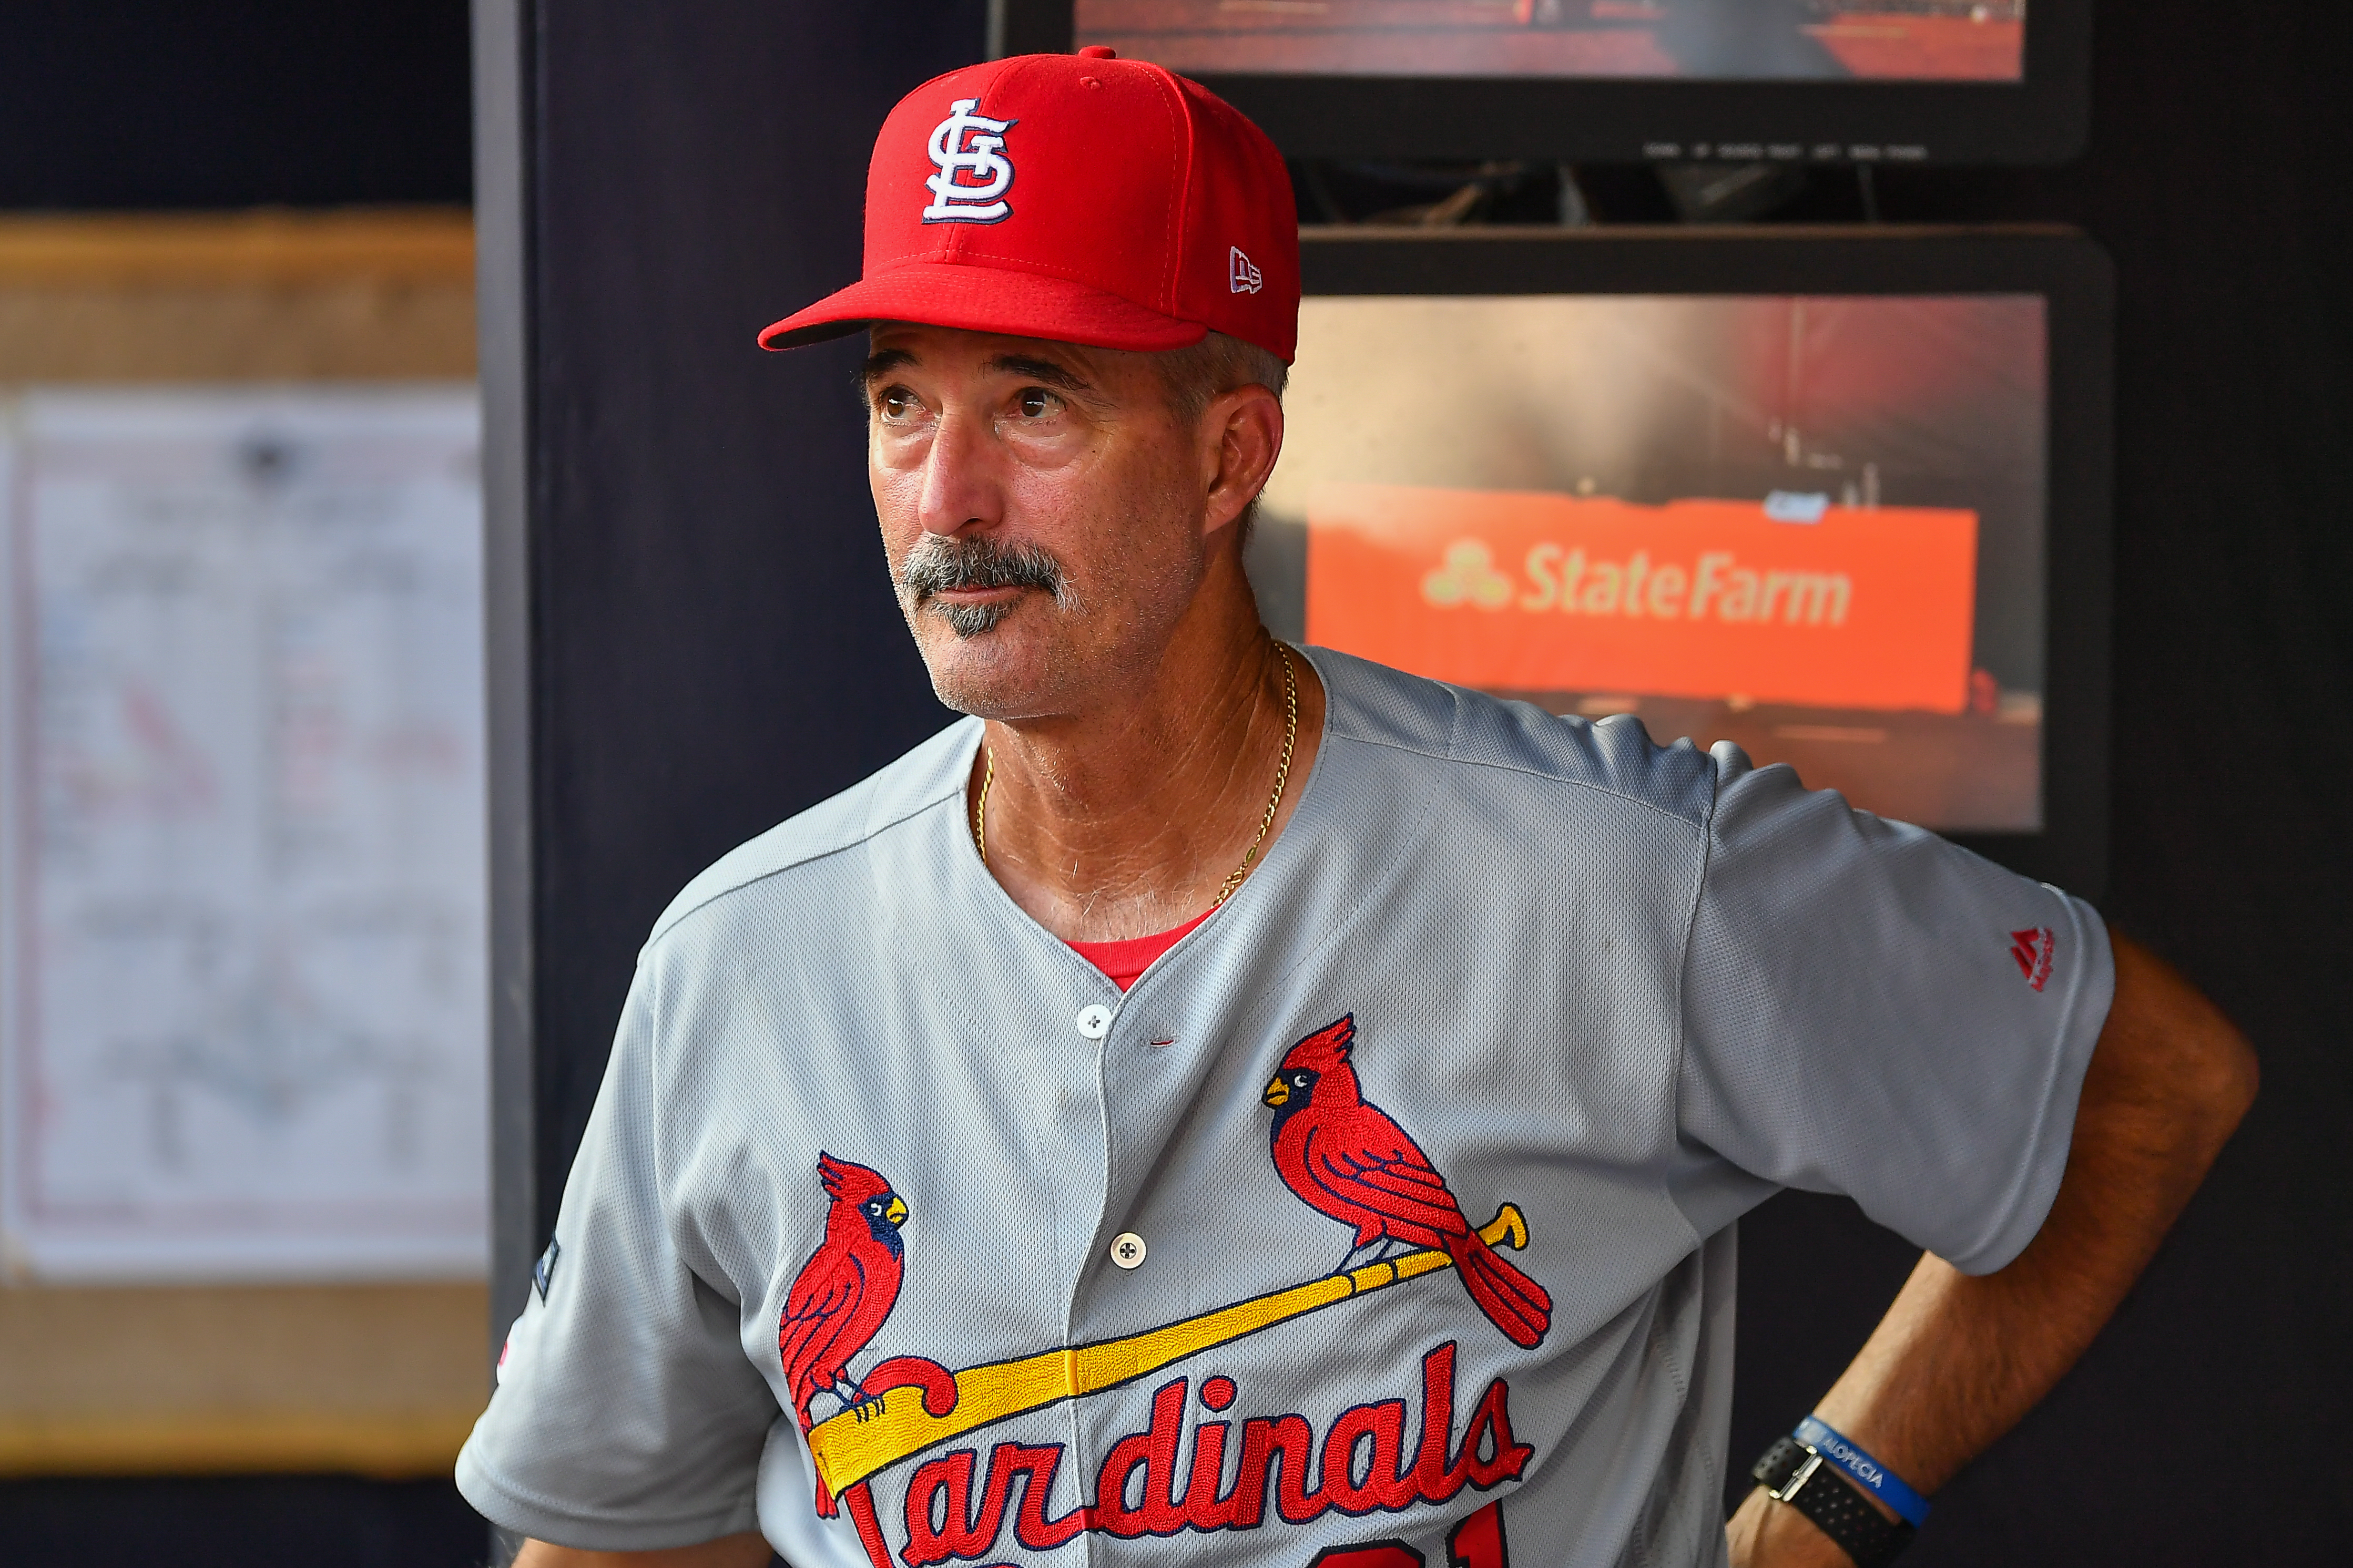 St. Louis Cardinals coach makes two holes-in-one before playoff